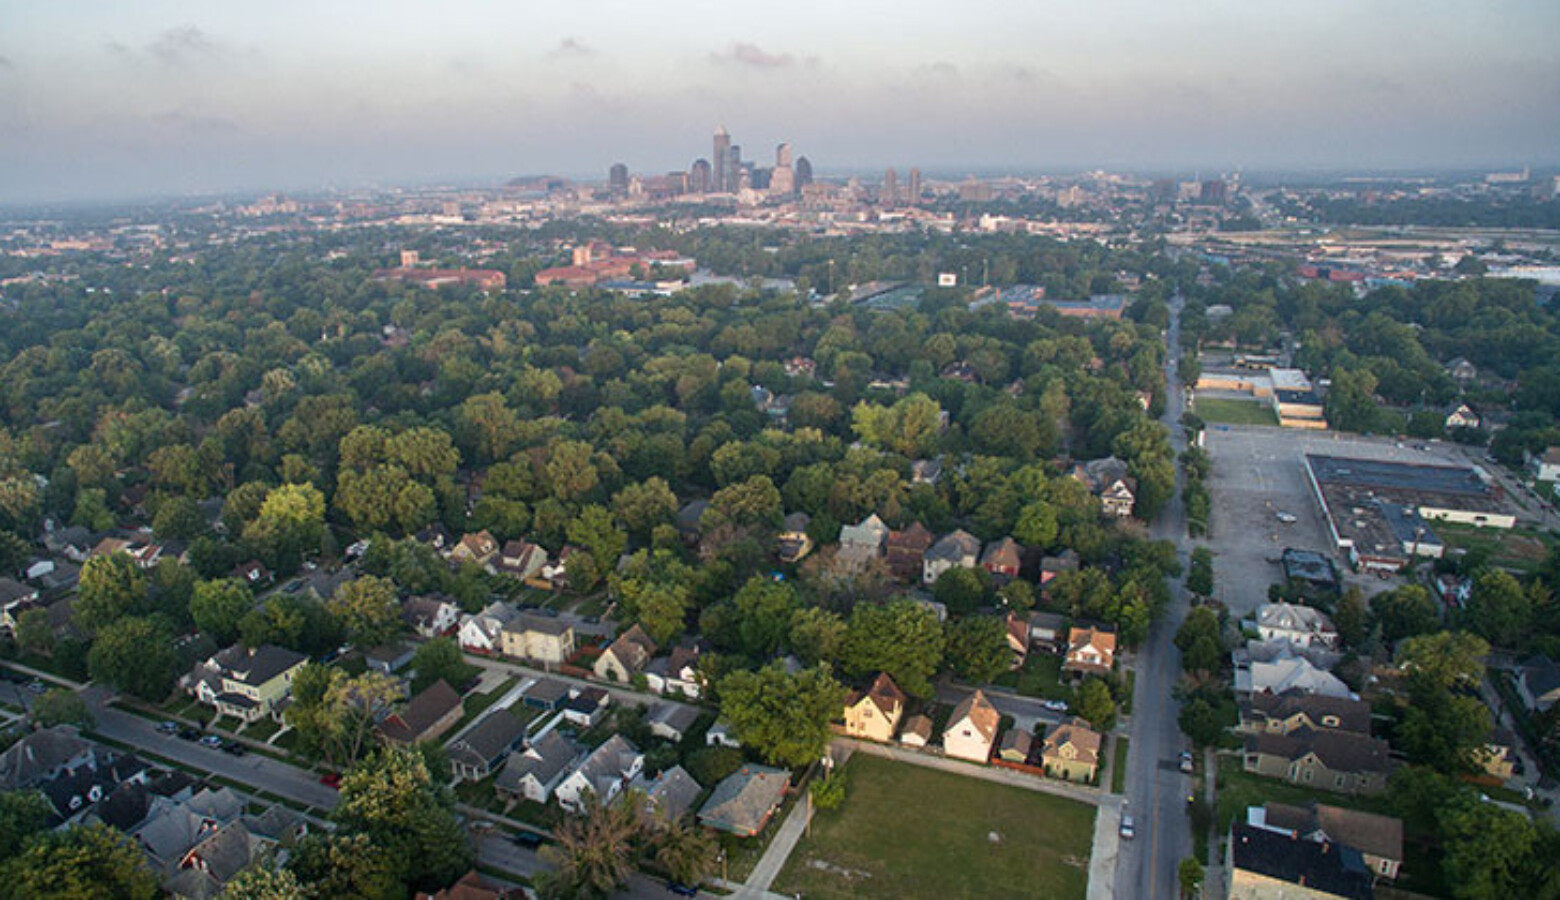 Analysis by the Indiana University Center for Research on Inclusion and Social Policy found that the median home value in majority black neighborhoods is $41,000 less than the average in Marion County.